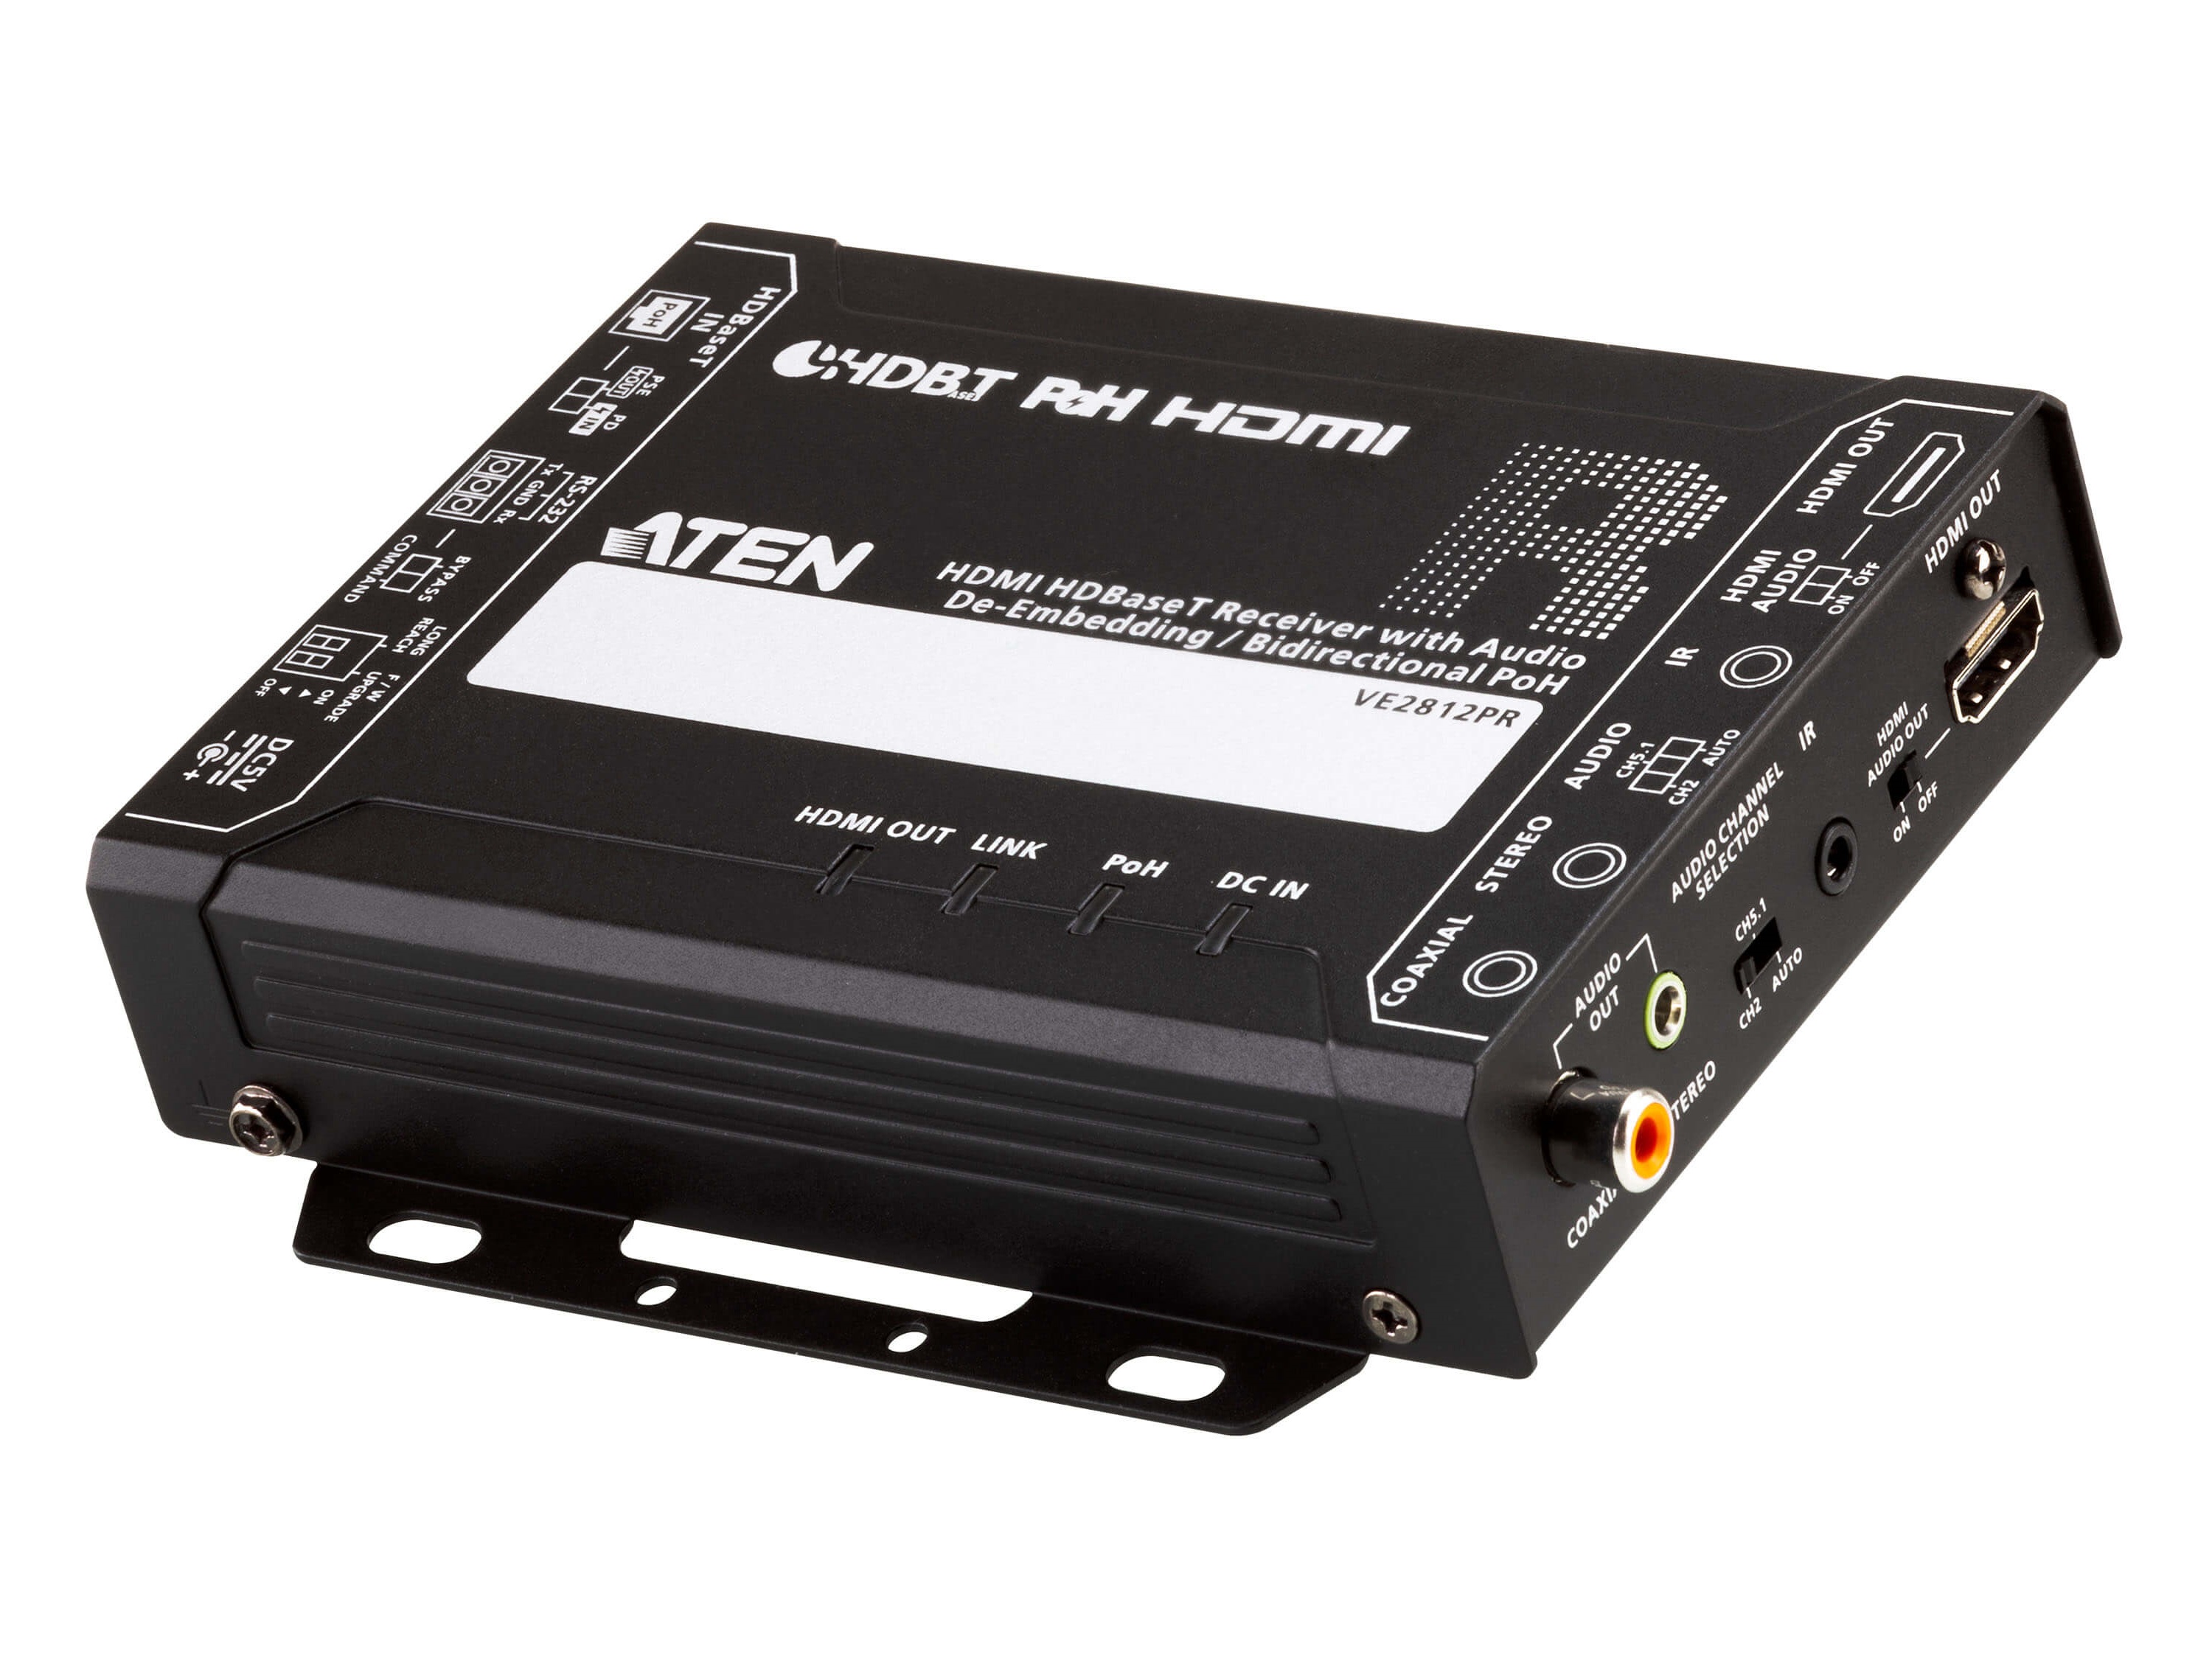 VE2812PR 4K/100m HDMI HDBaseT Receiver with Audio De-Embedding/Bi-Directional PoH/HDBaseT Class A/PoH PSE and PD by Aten